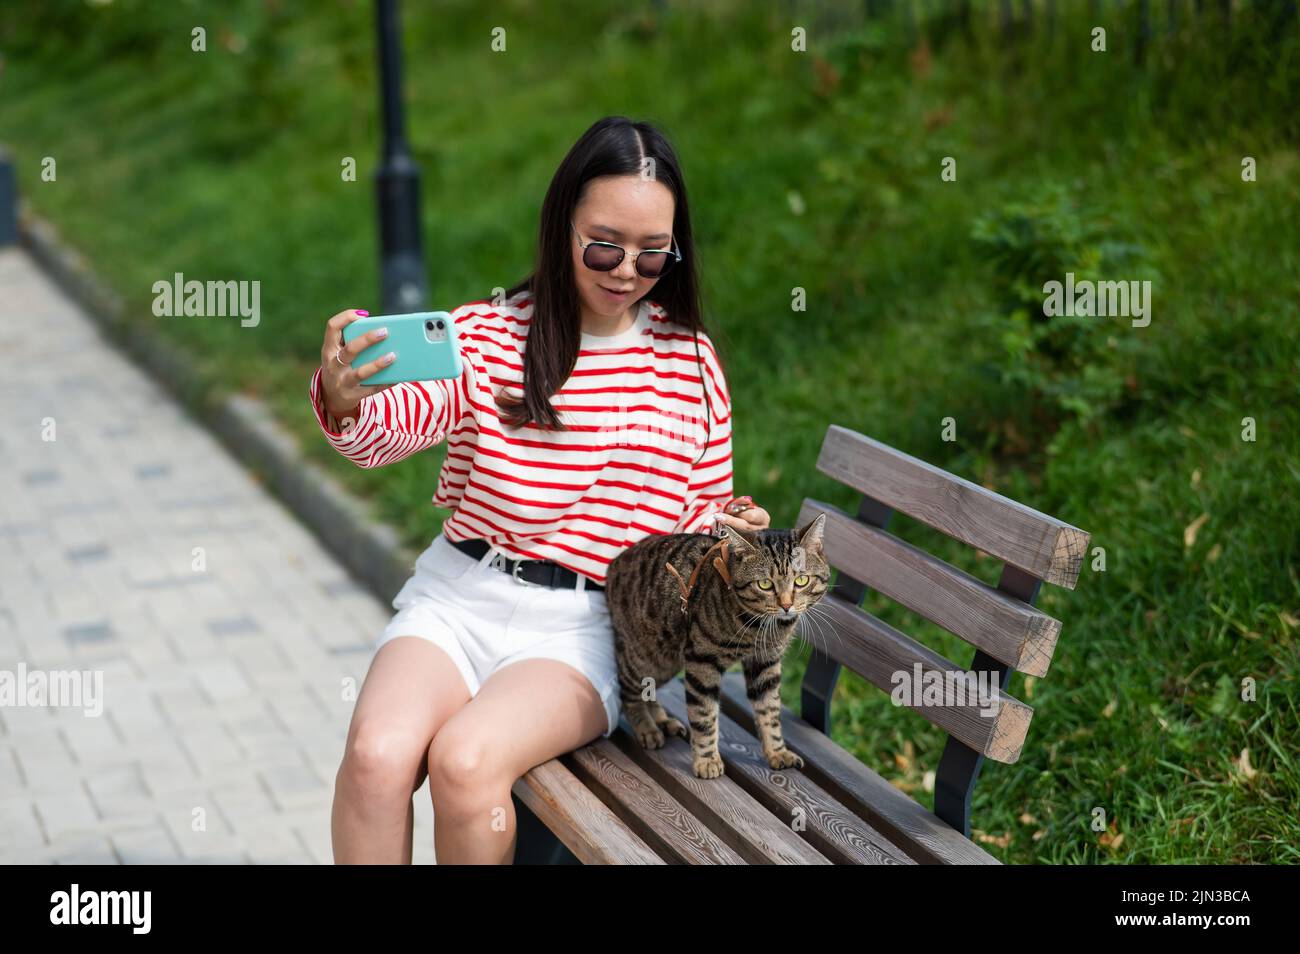 Young woman sits on a bench with a tabby cat and takes a selfie on a smartphone outdoors.  Stock Photo